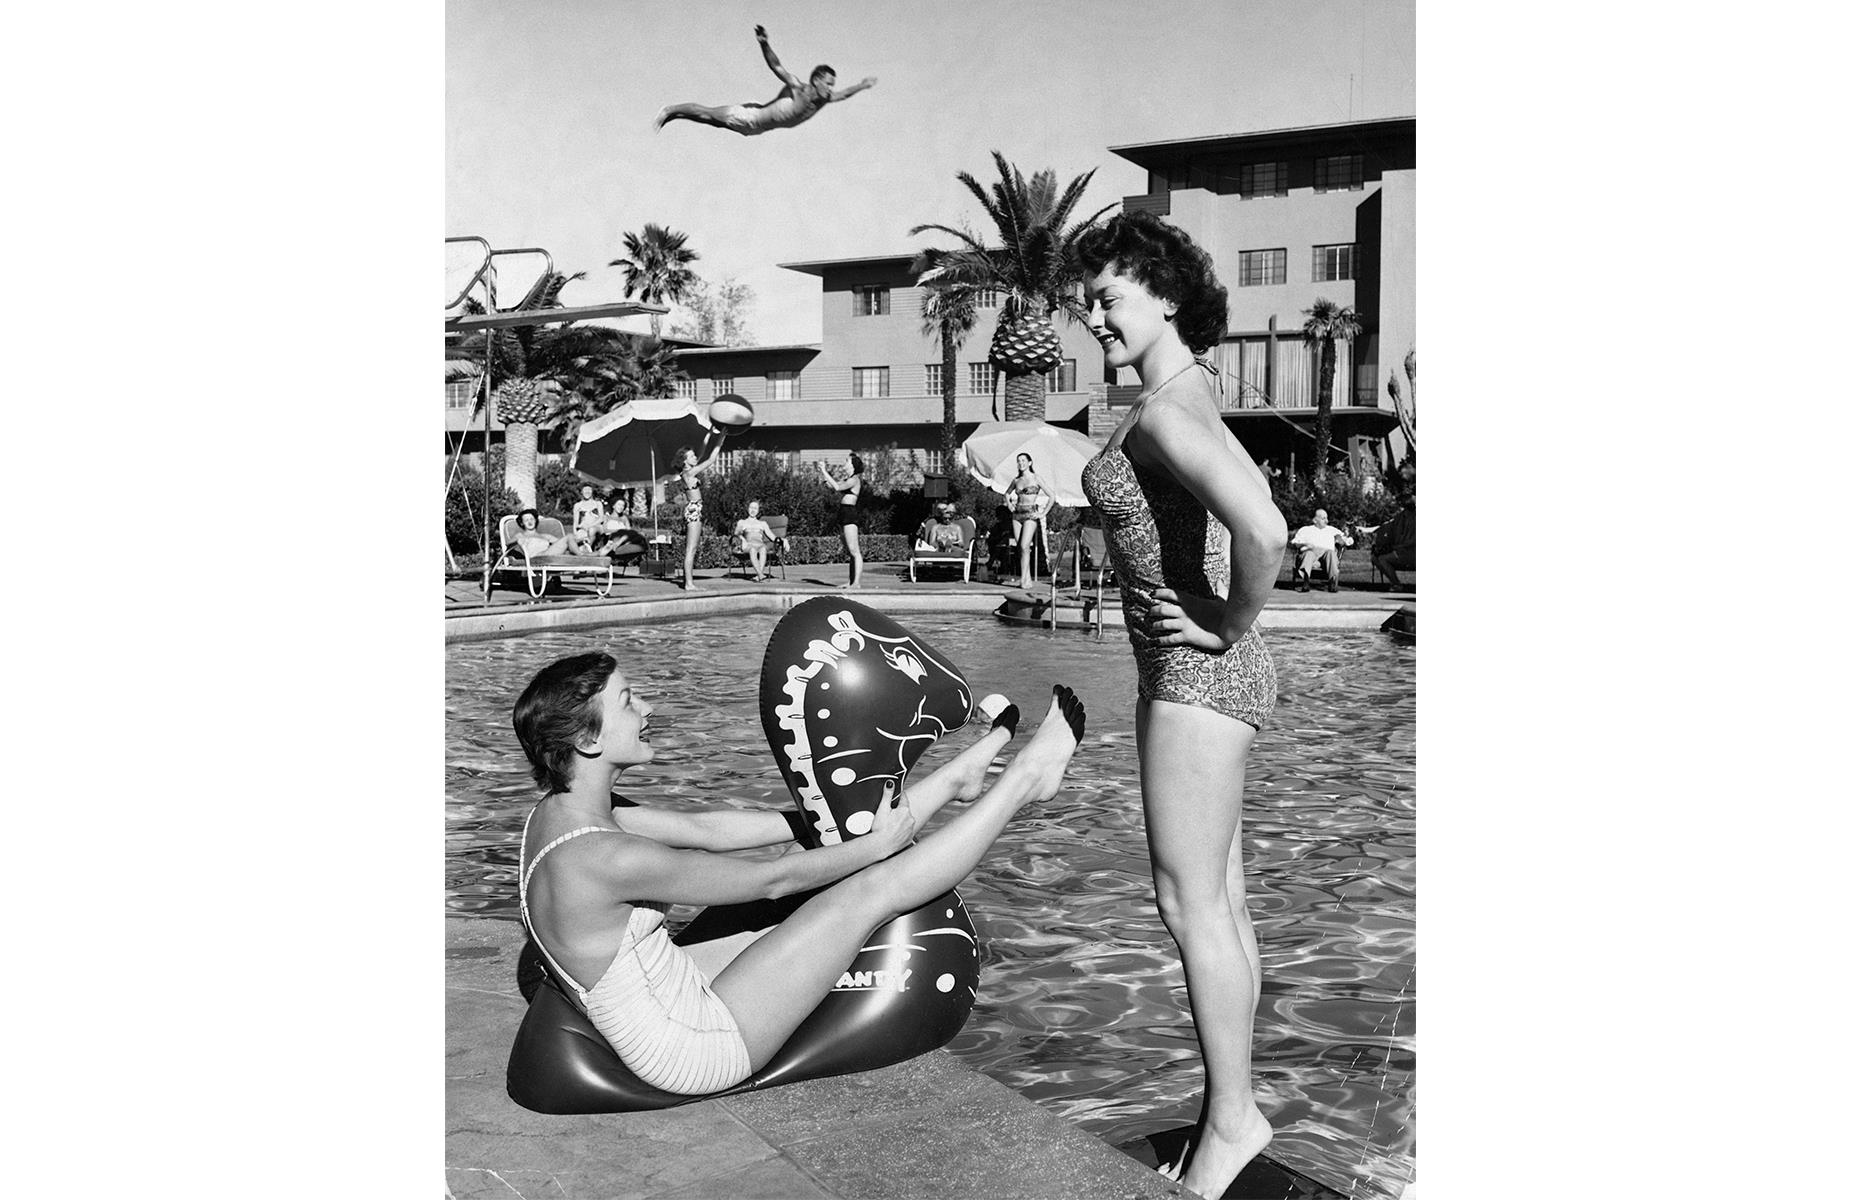 Away from the coast, Las Vegas was the pleasure-seeker's vacation spot of choice. Plush hotels and resorts sprang up in Sin City in the Forties and Fifties, as the legendary Strip continued to develop. Here, well-heeled holidaymakers let their hair down around the pool at this Vegas resort in 1955.